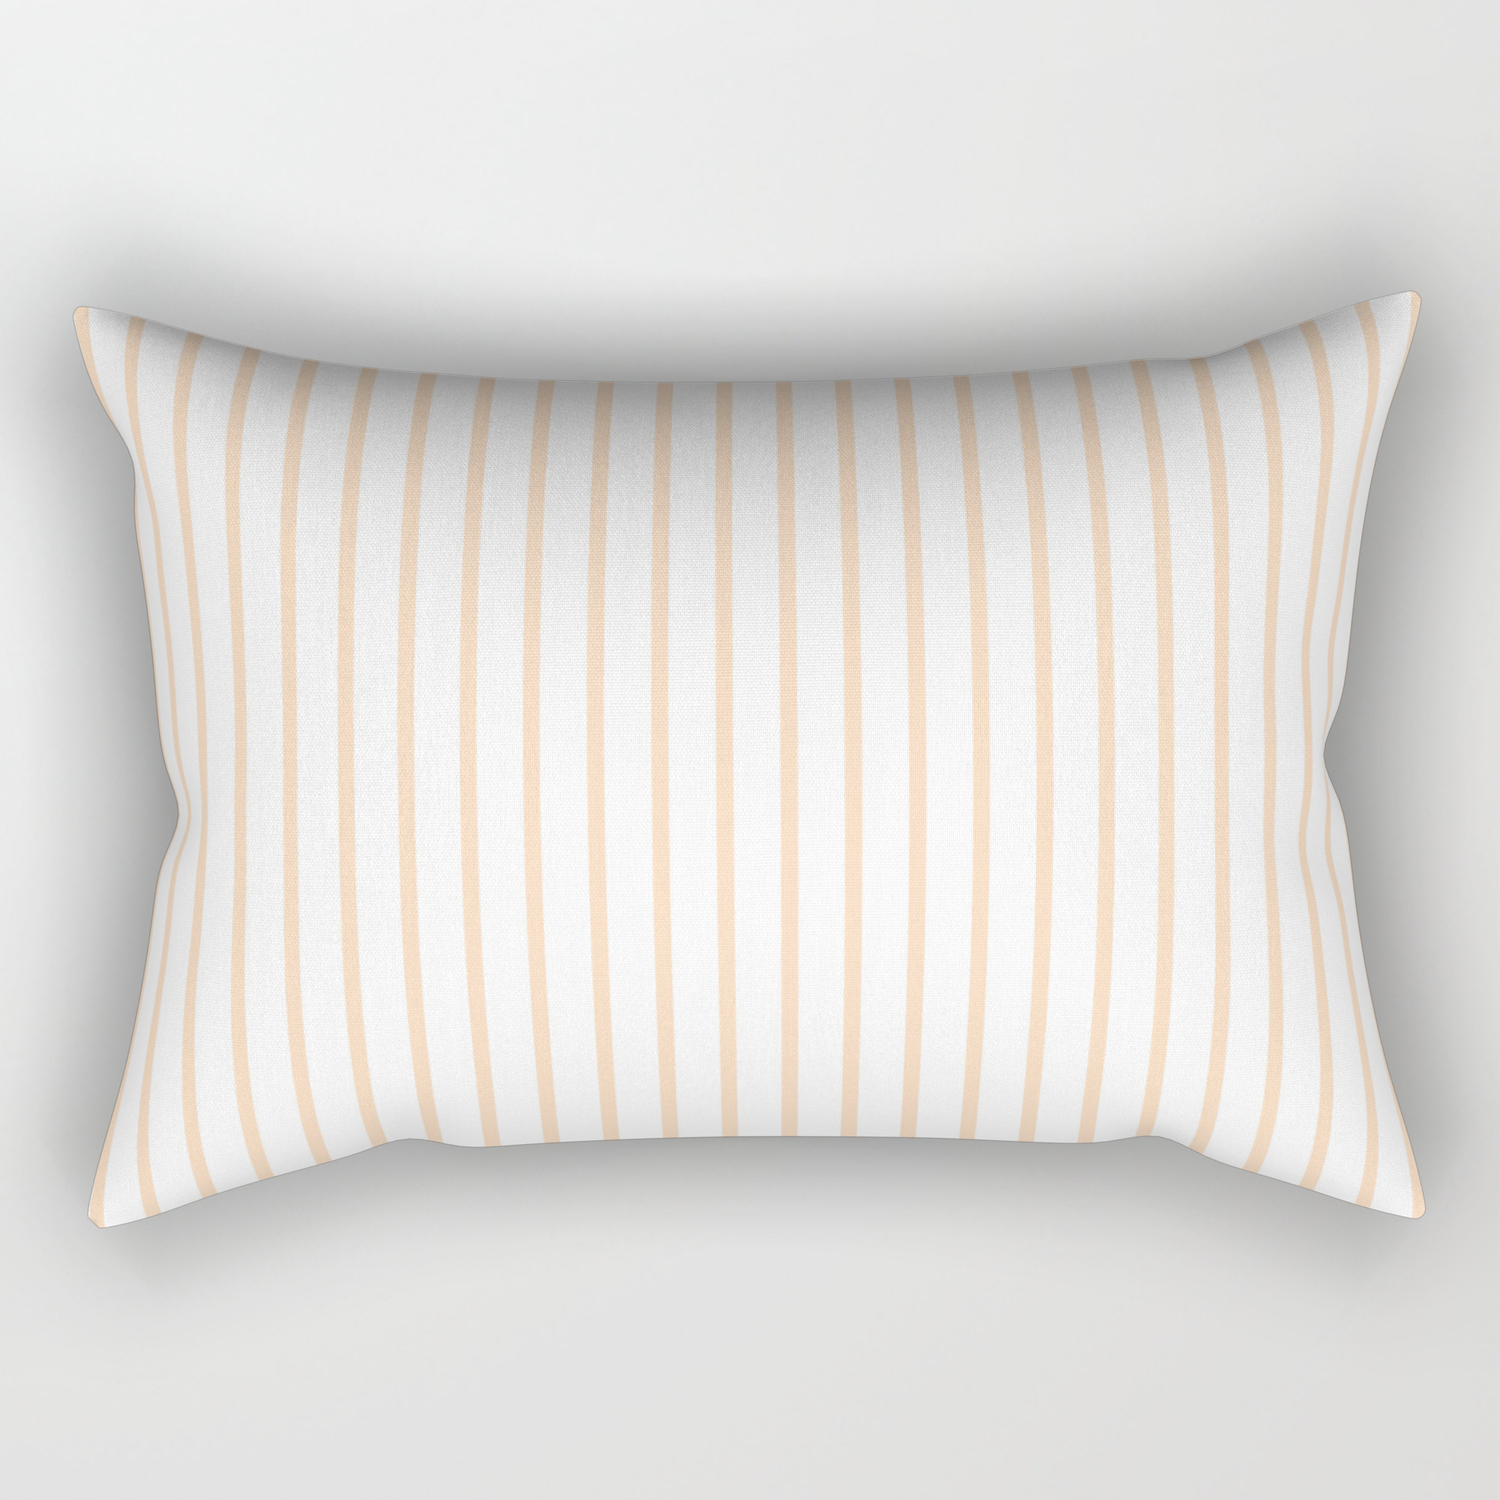 Society6 Peach by Kind of Style on Rectangular Pillow Large 25.5 x 18